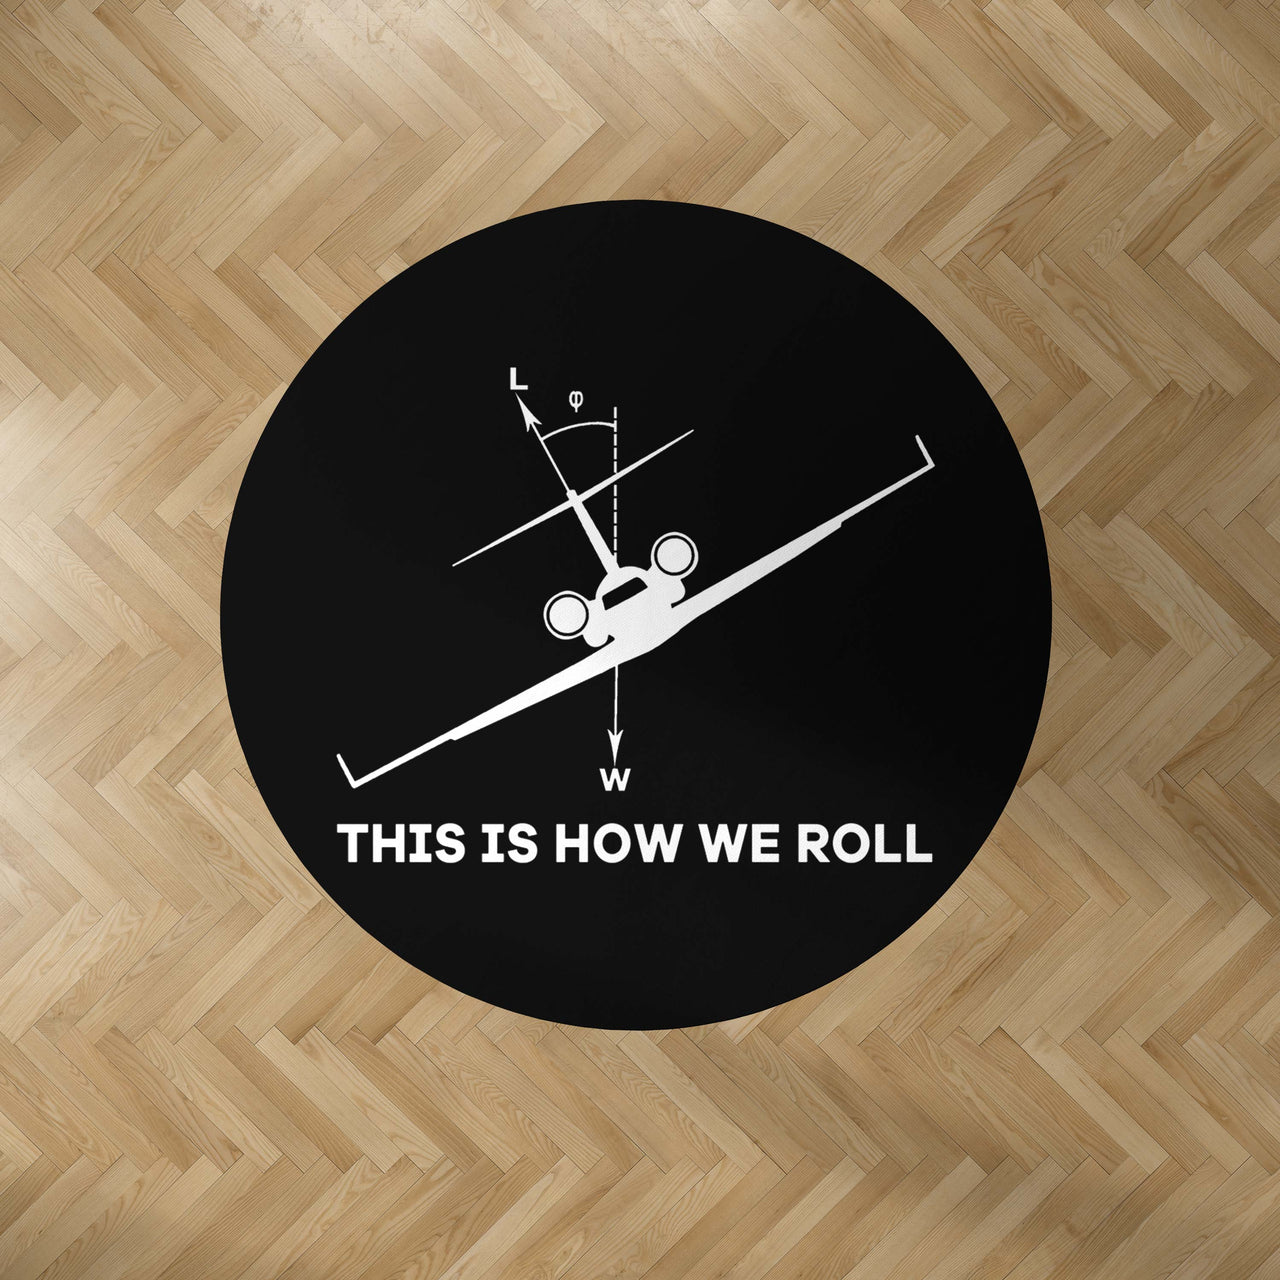 This is How We Roll Designed Carpet & Floor Mats (Round)